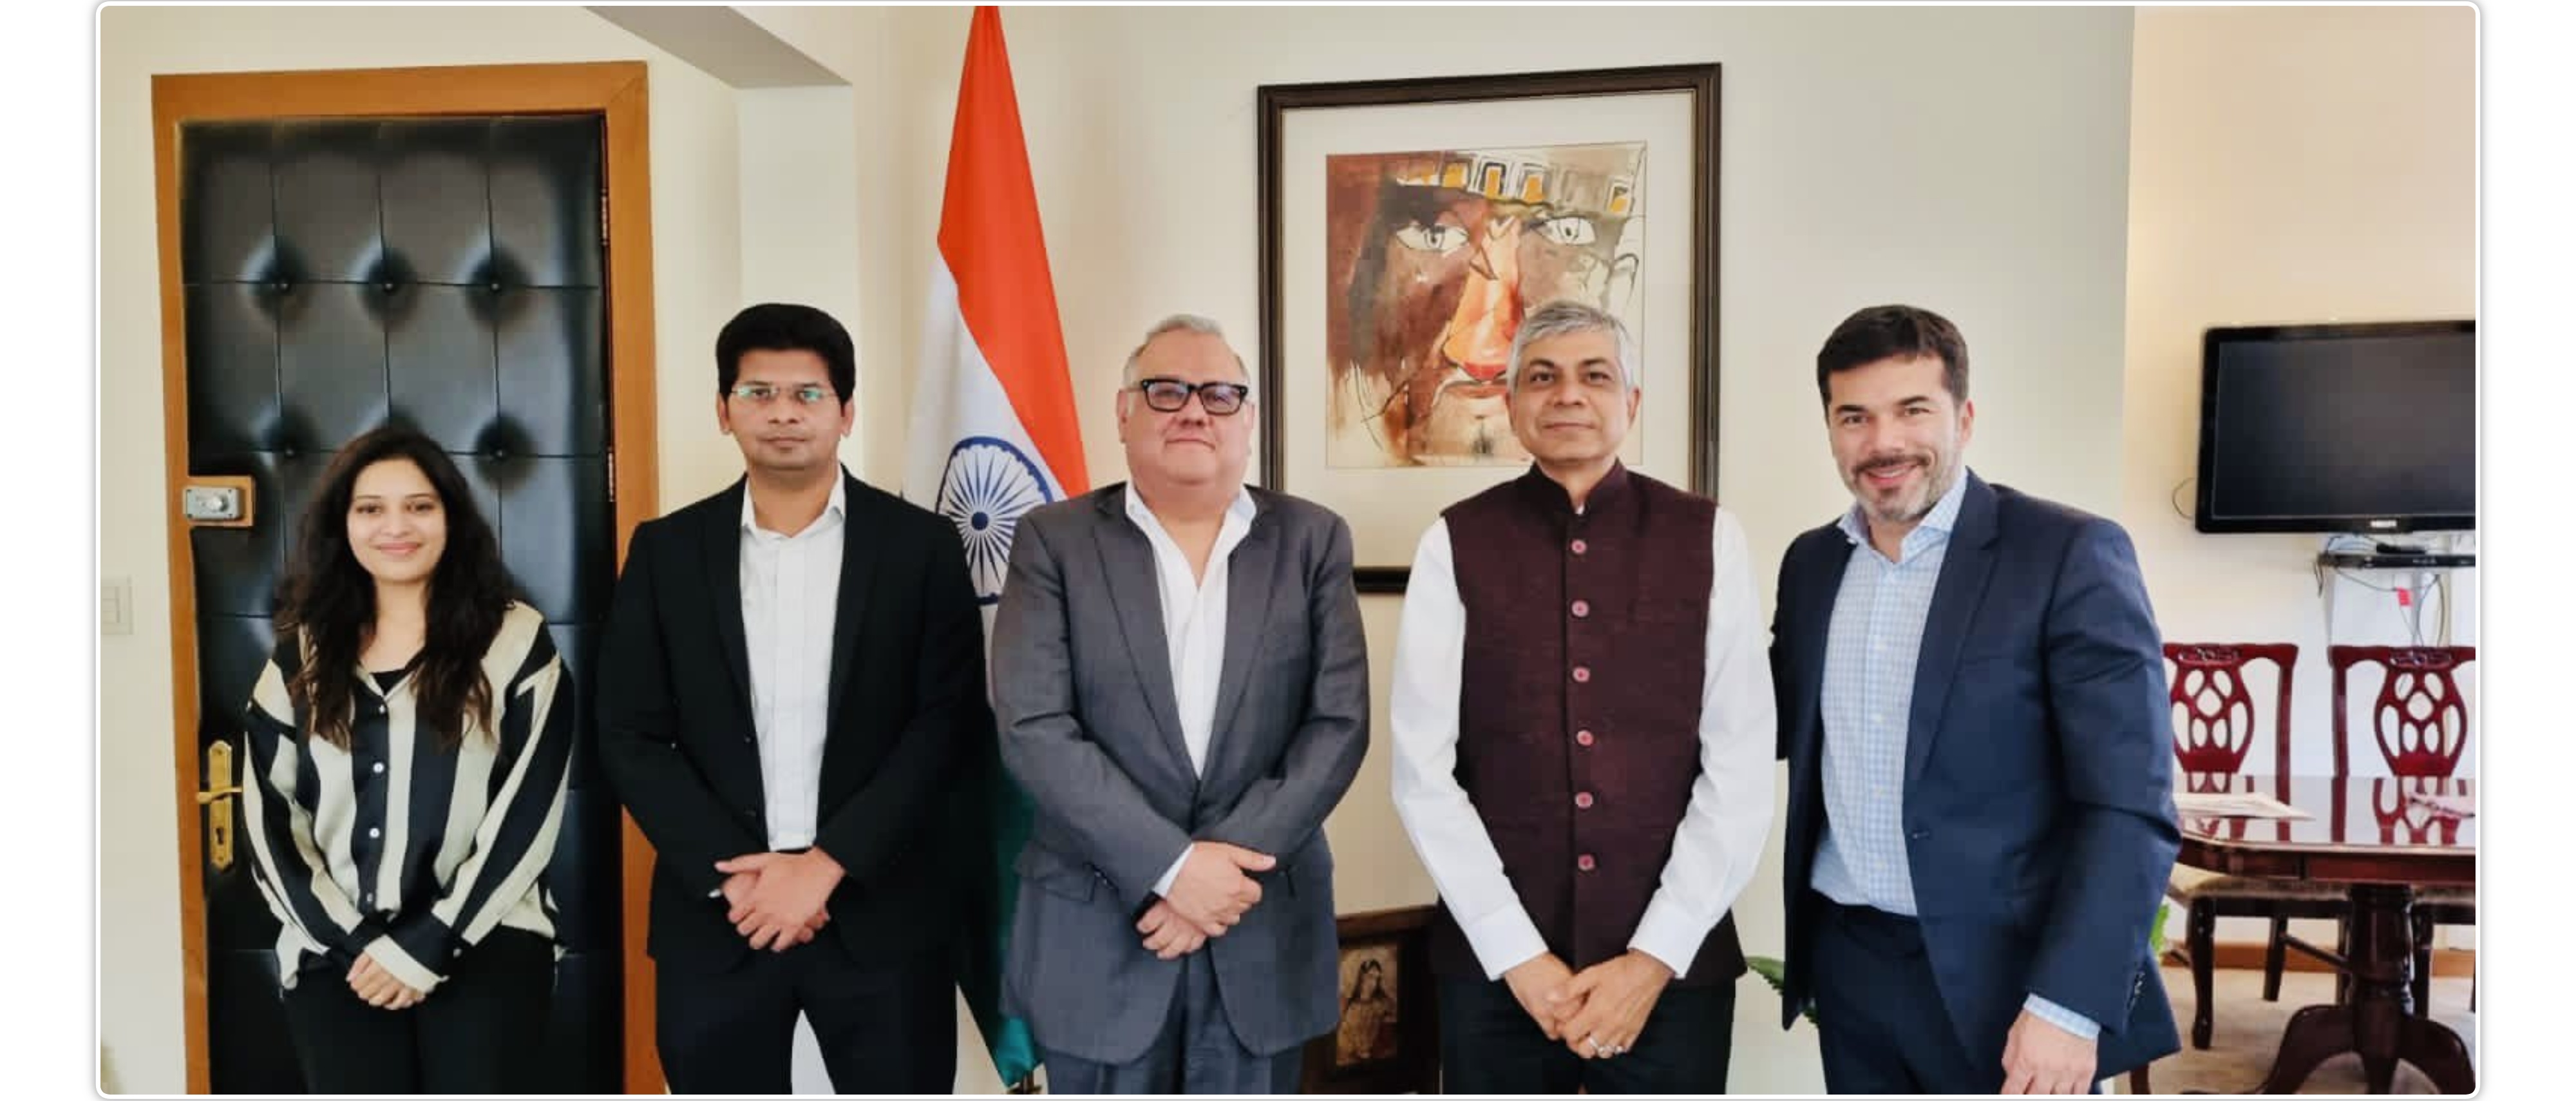  <div style="fcolor: #fff; font-weight: 600; font-size: 1.5em;">
<p style="font-size: 13.8px;">
Ambassador Dr. Pankaj Sharma and Second Secretary Ms. Vallari Gaikwad met with Mr. Jorge Barreto & other representatives from one of India's leading pharmaceutical companies- Torrent Pharmaceuticals Ltd. 

The discussion was about increasing the exports of important medicines & deepening their footprint in México.
<br /><span style="text-align: center;">14 March 2023</span></p>
</div>